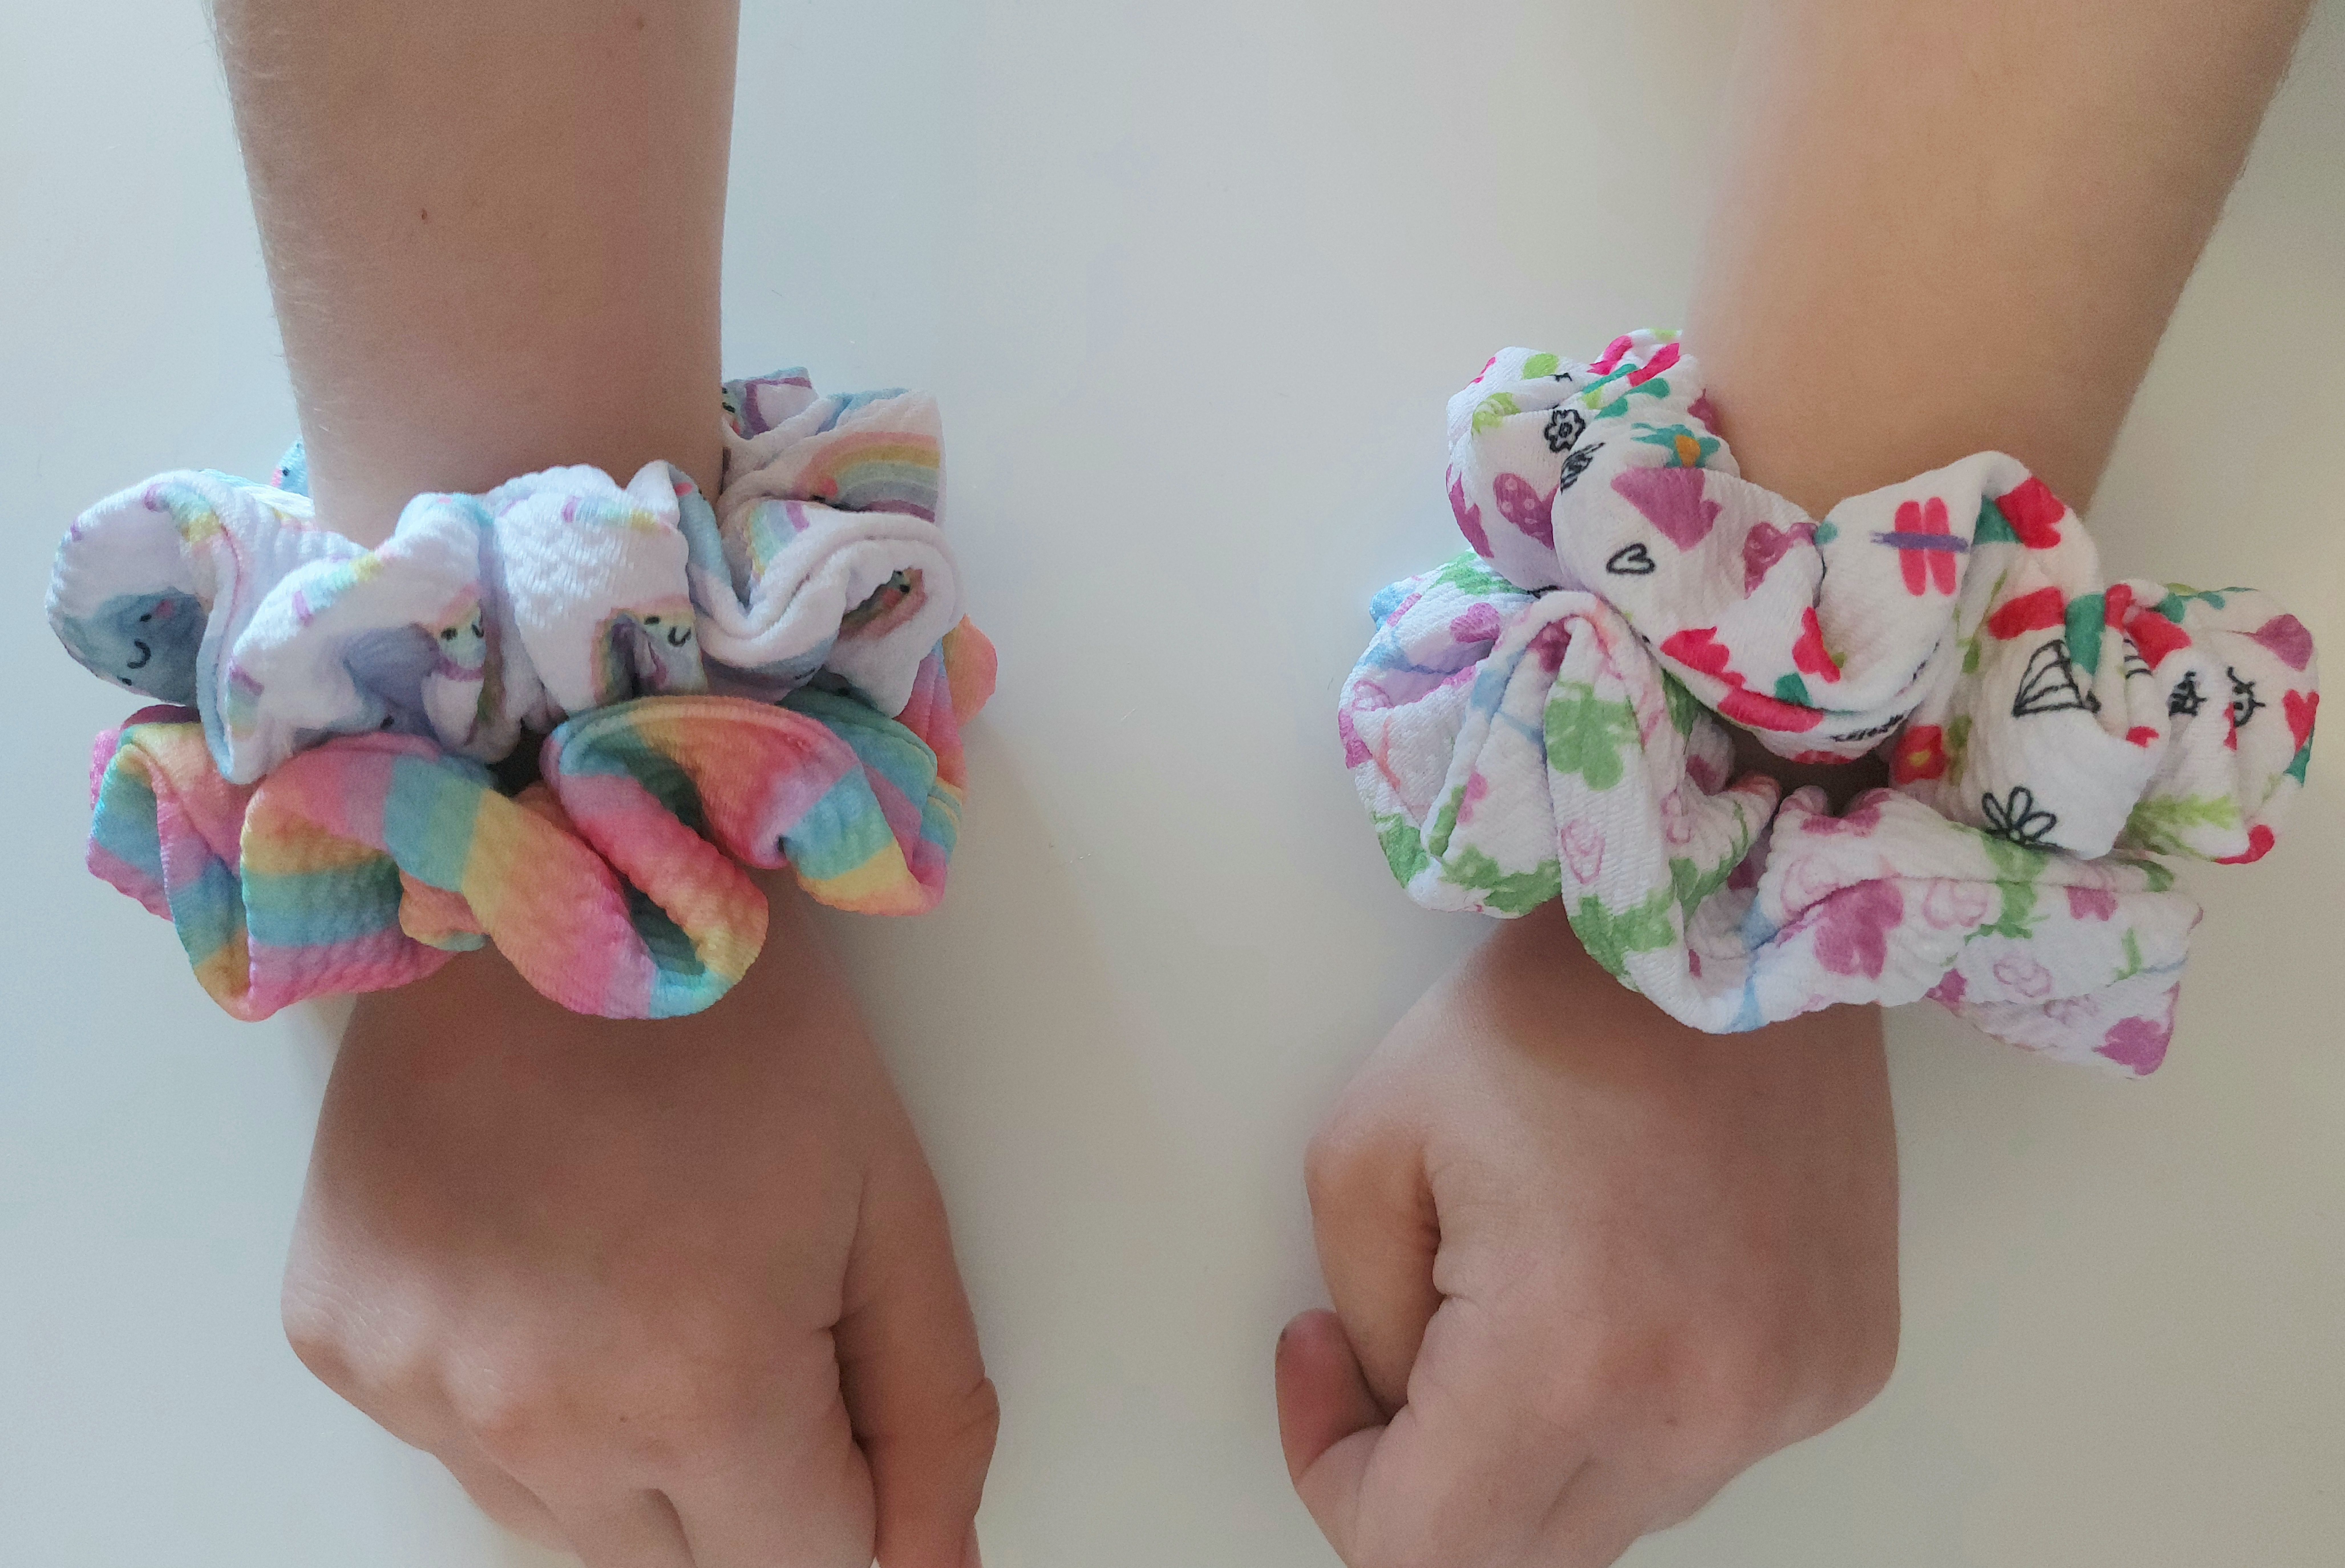 Fairy Scrunchie for Girls, Thinner Hair or Half Ponytails in Bullet fabric.